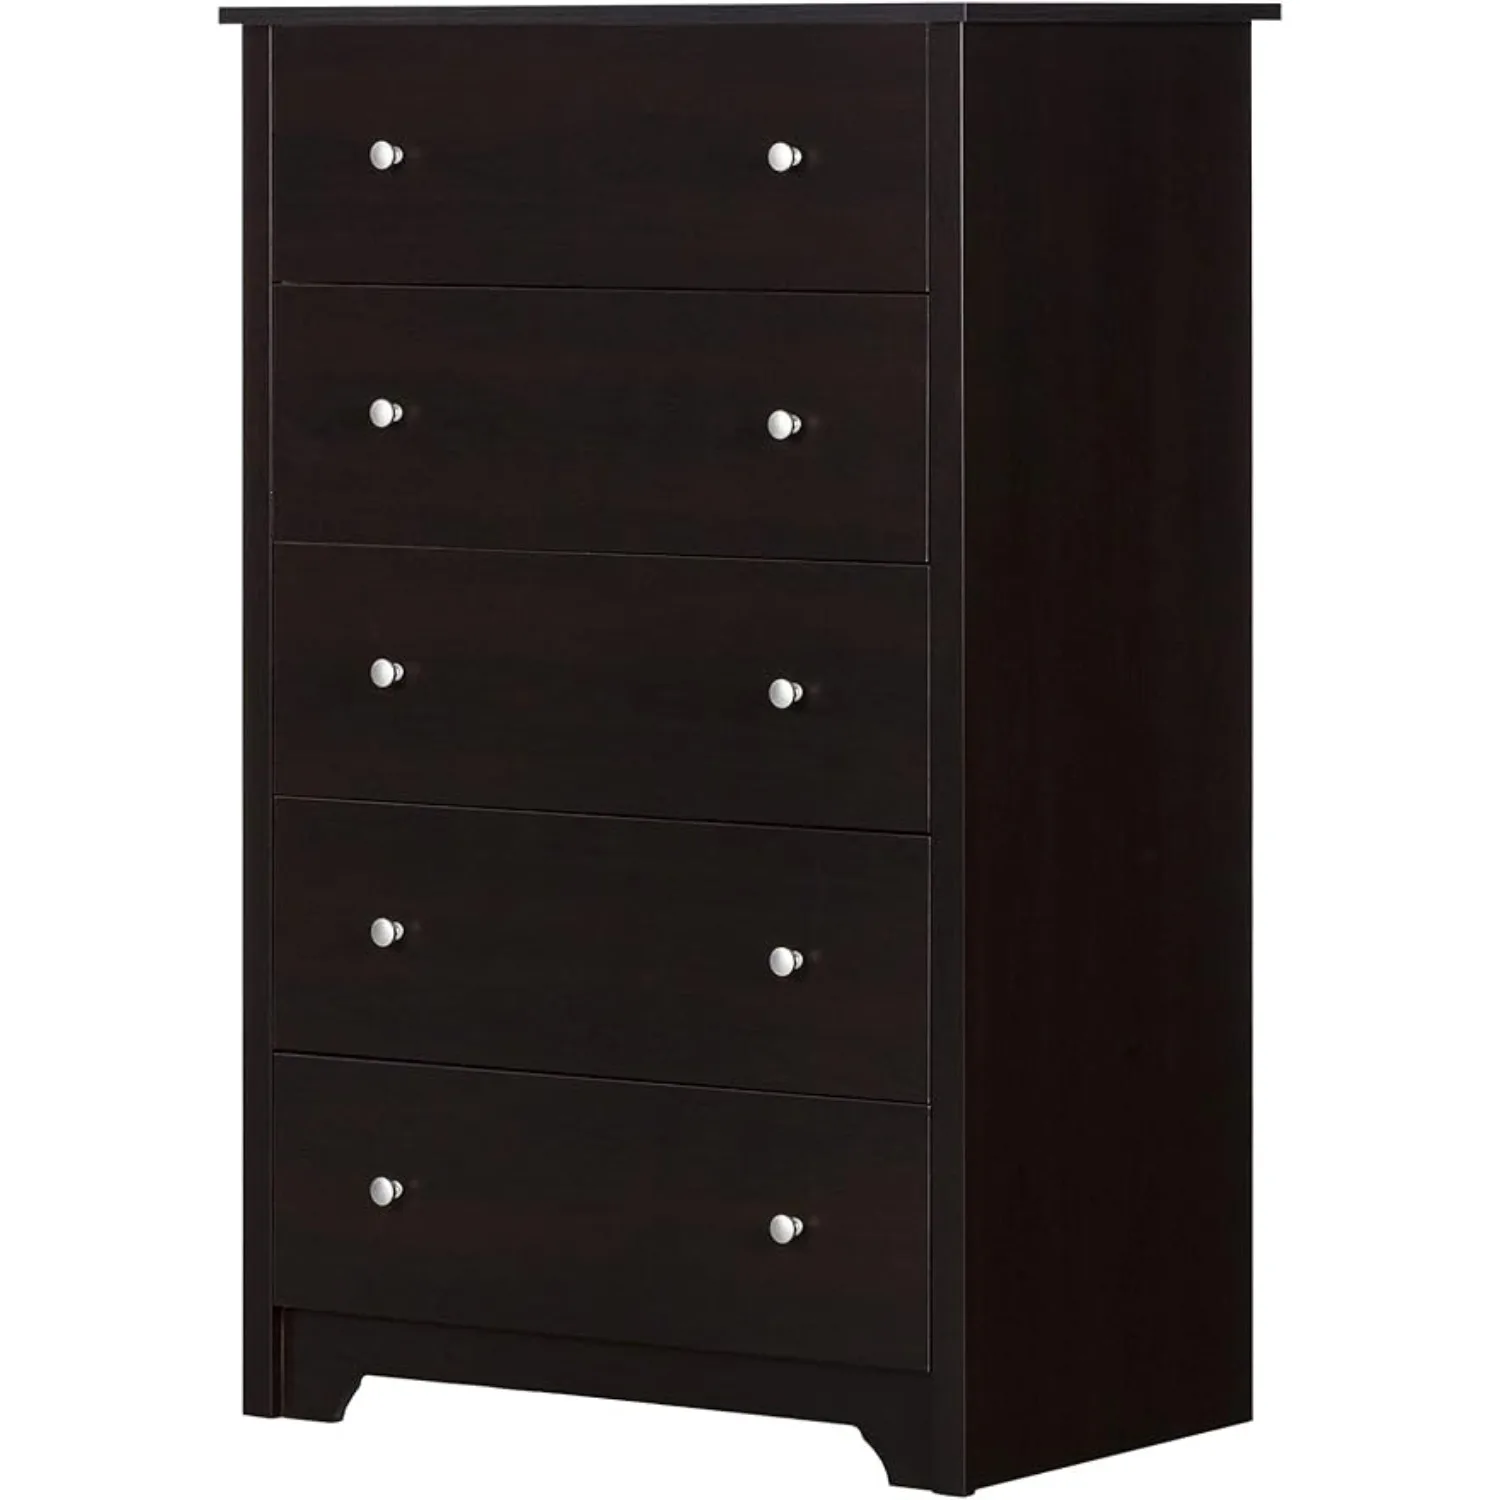 

South Shore Vito Collection 5-Drawer Dresser, Chocolate with Matte Nickel Handles